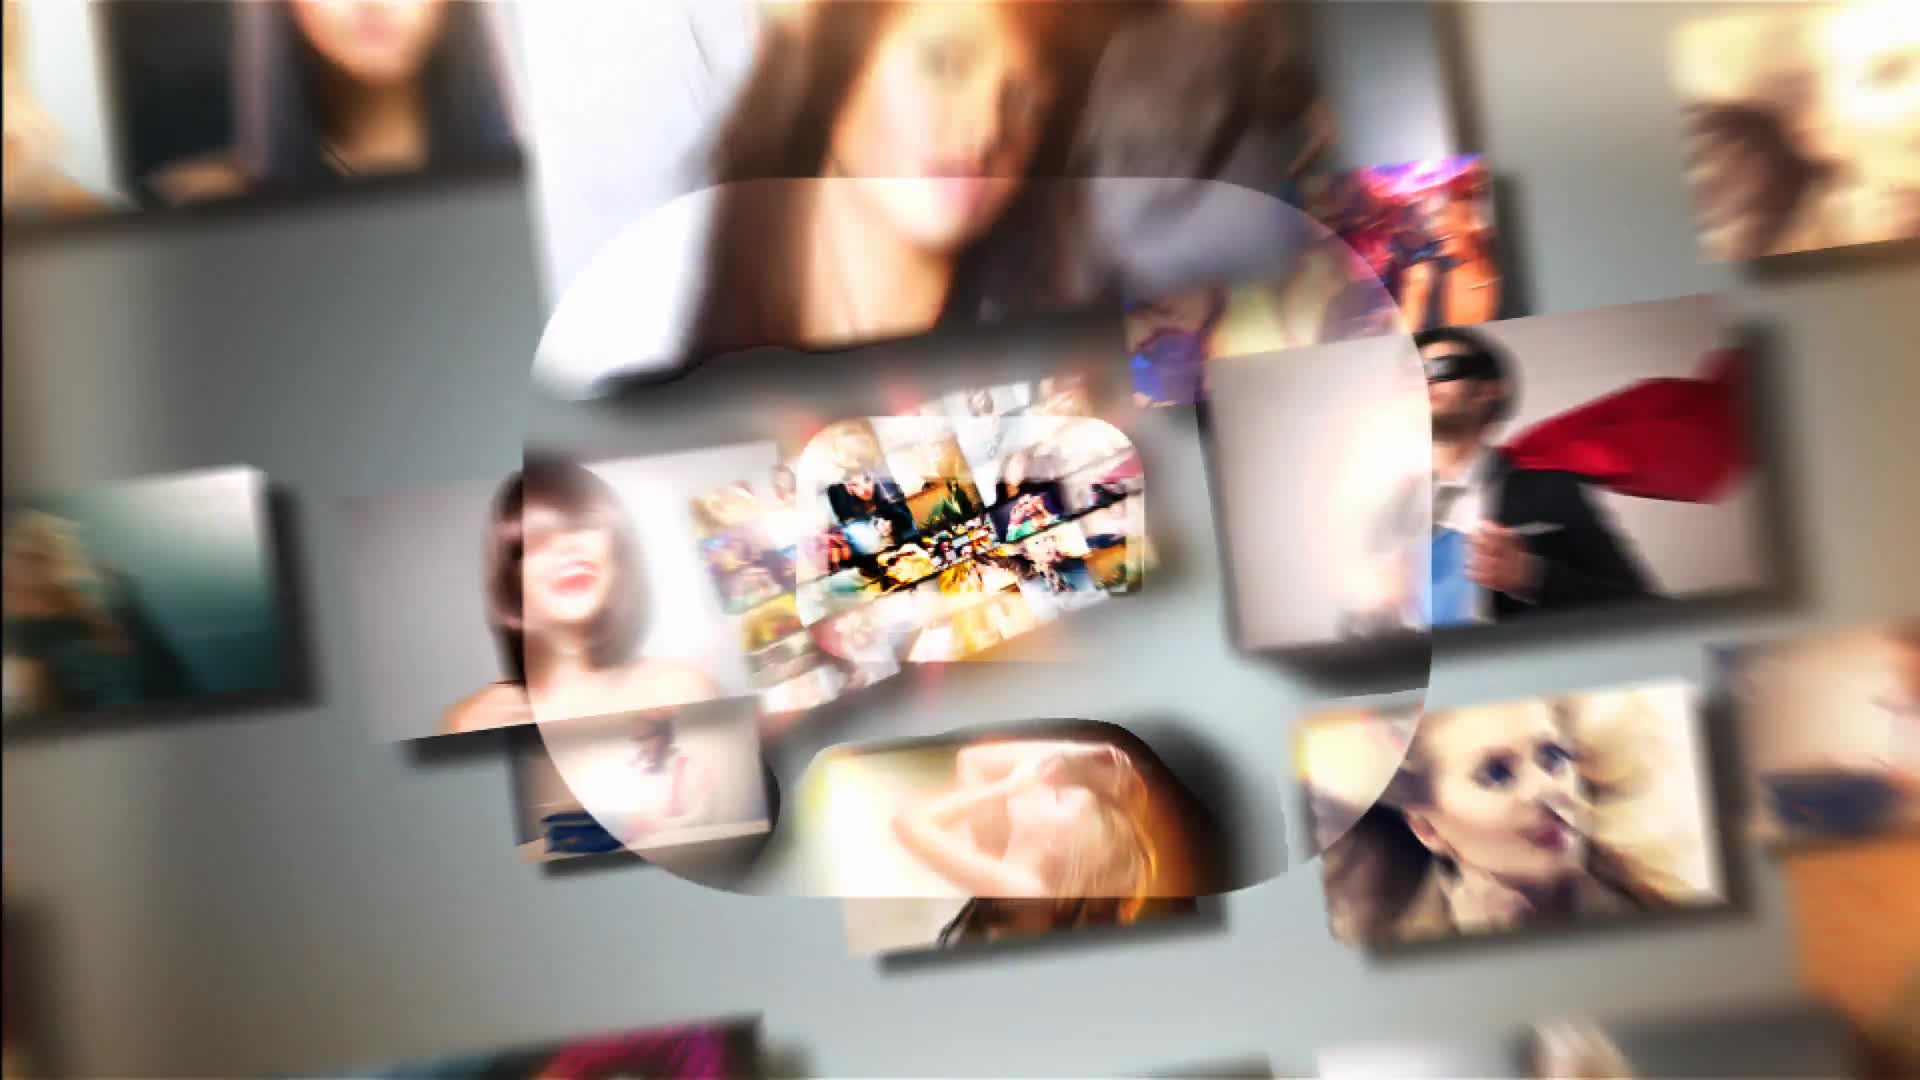 New Show v.2 - Download Videohive 9853770